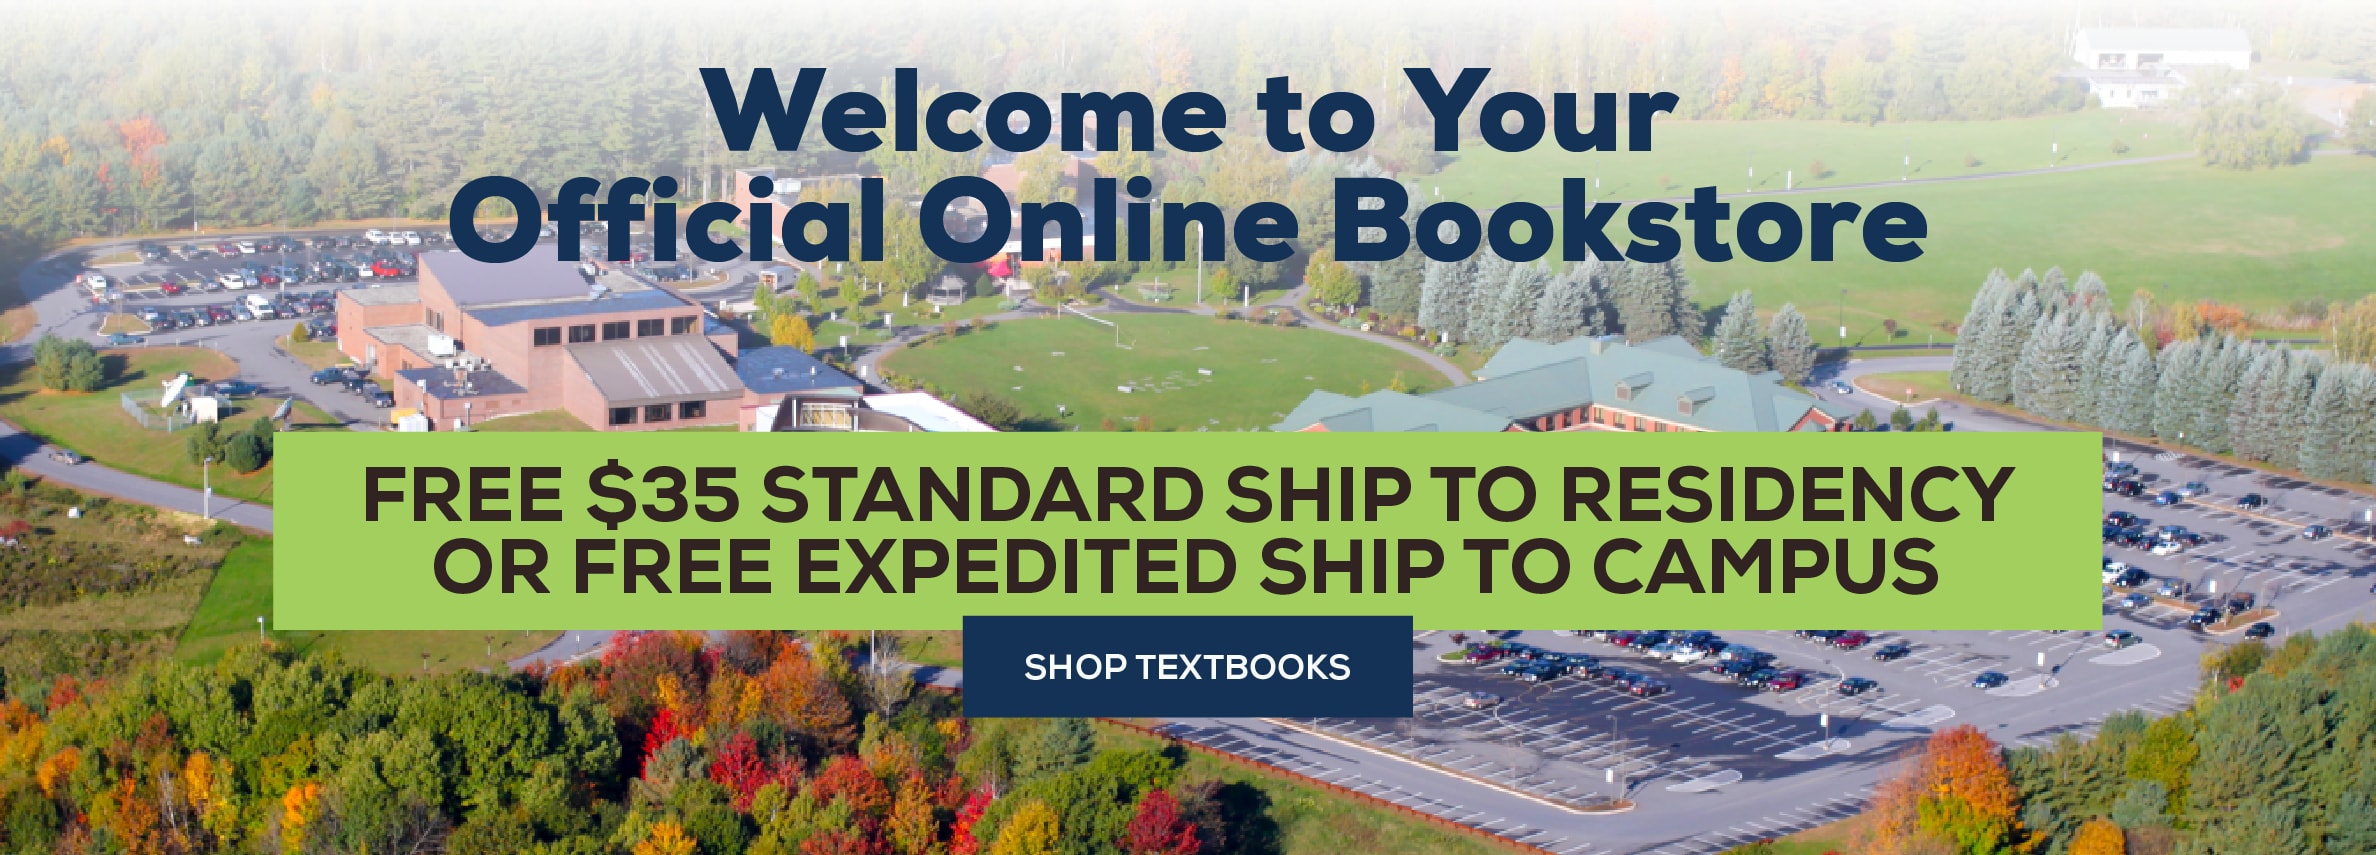 Welcome to your official online bookstore. Free $35 standard ship to residency; Free Expedited ship to Campus Shop textbooks (new tab)